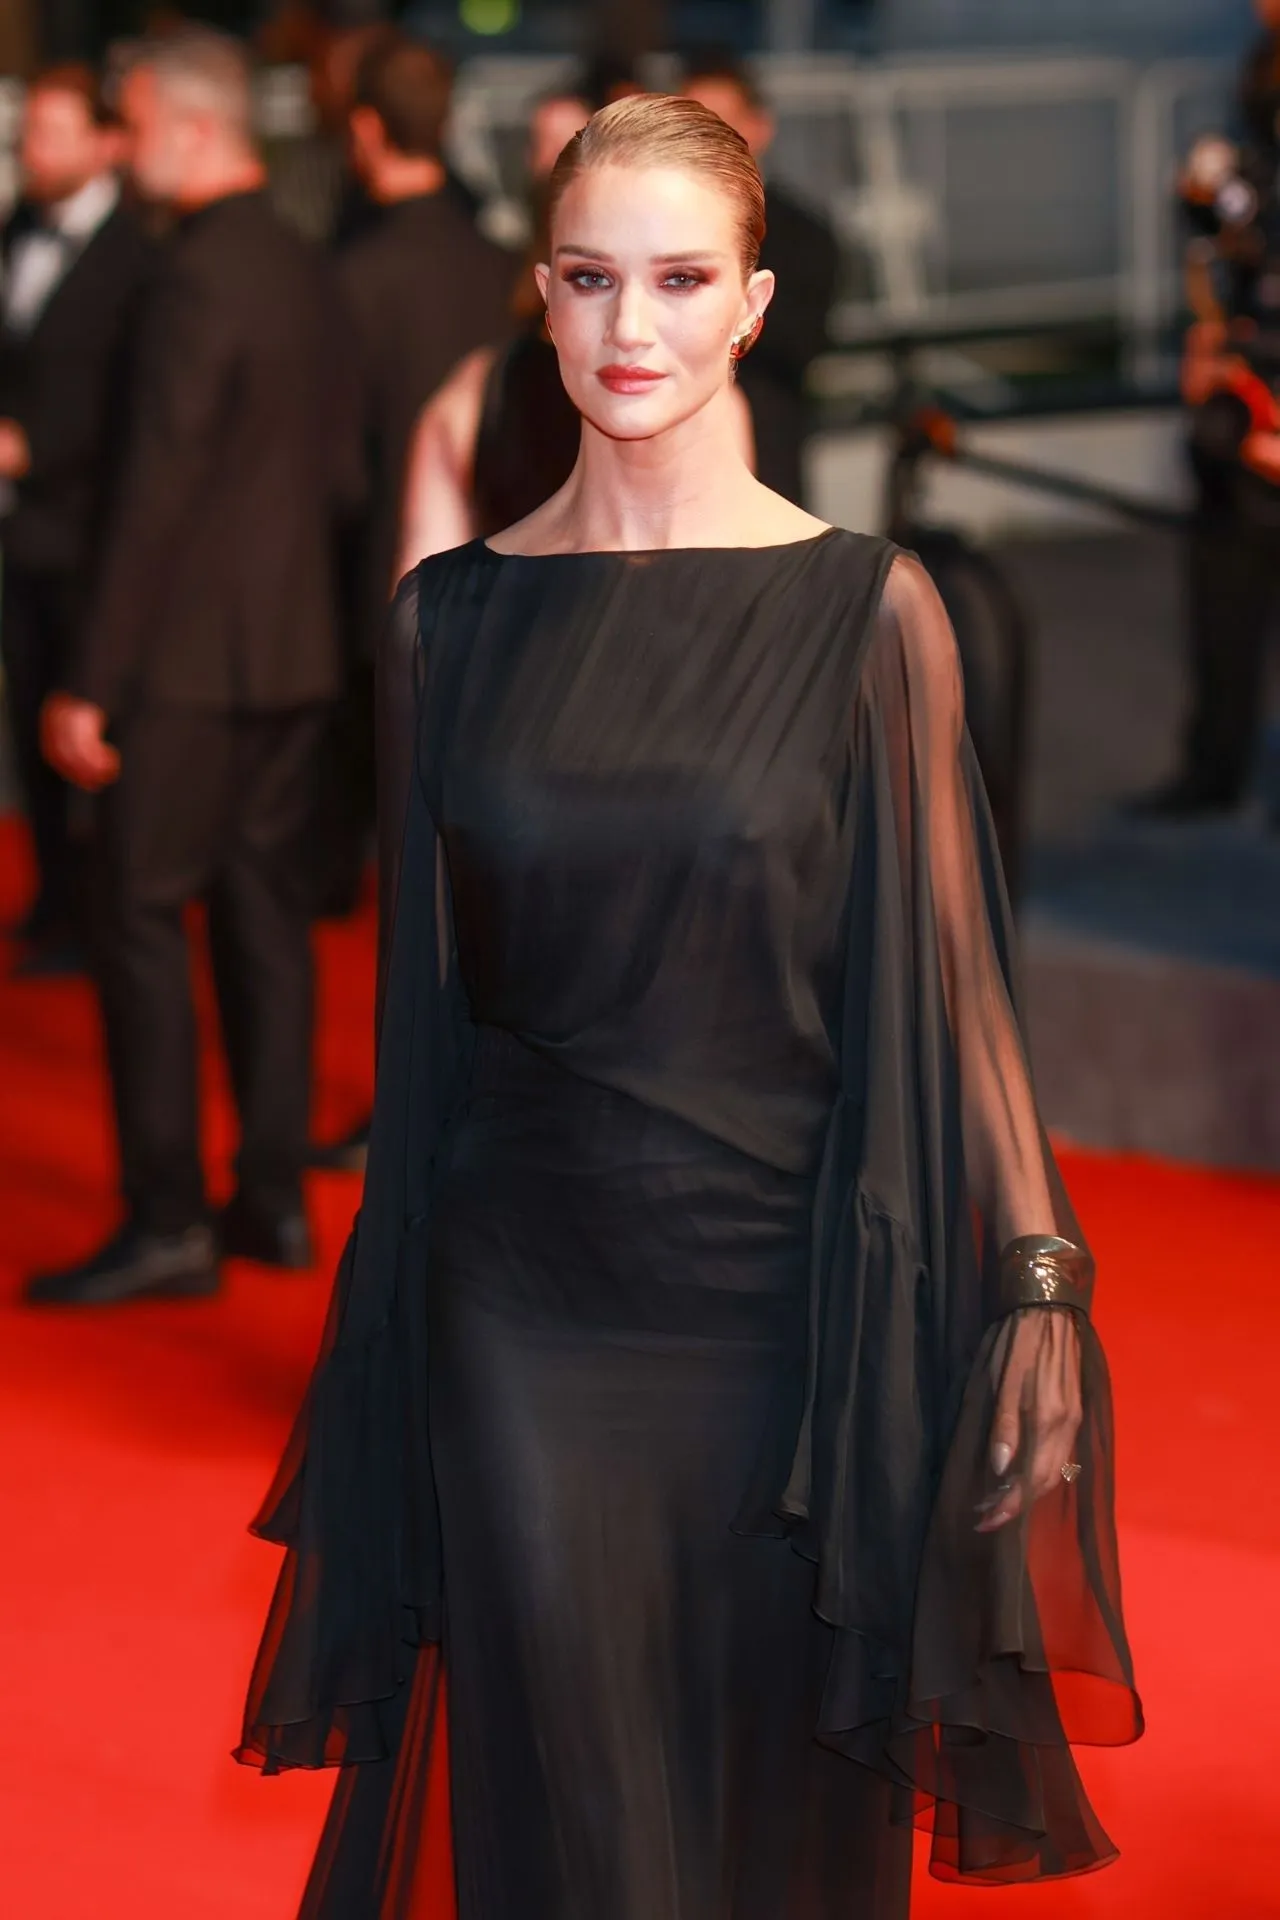 ROSIE HUNTINGTON WHITELEY AT THE SHROUDS PREMIERE AT CANNES FILM FESTIVAL06